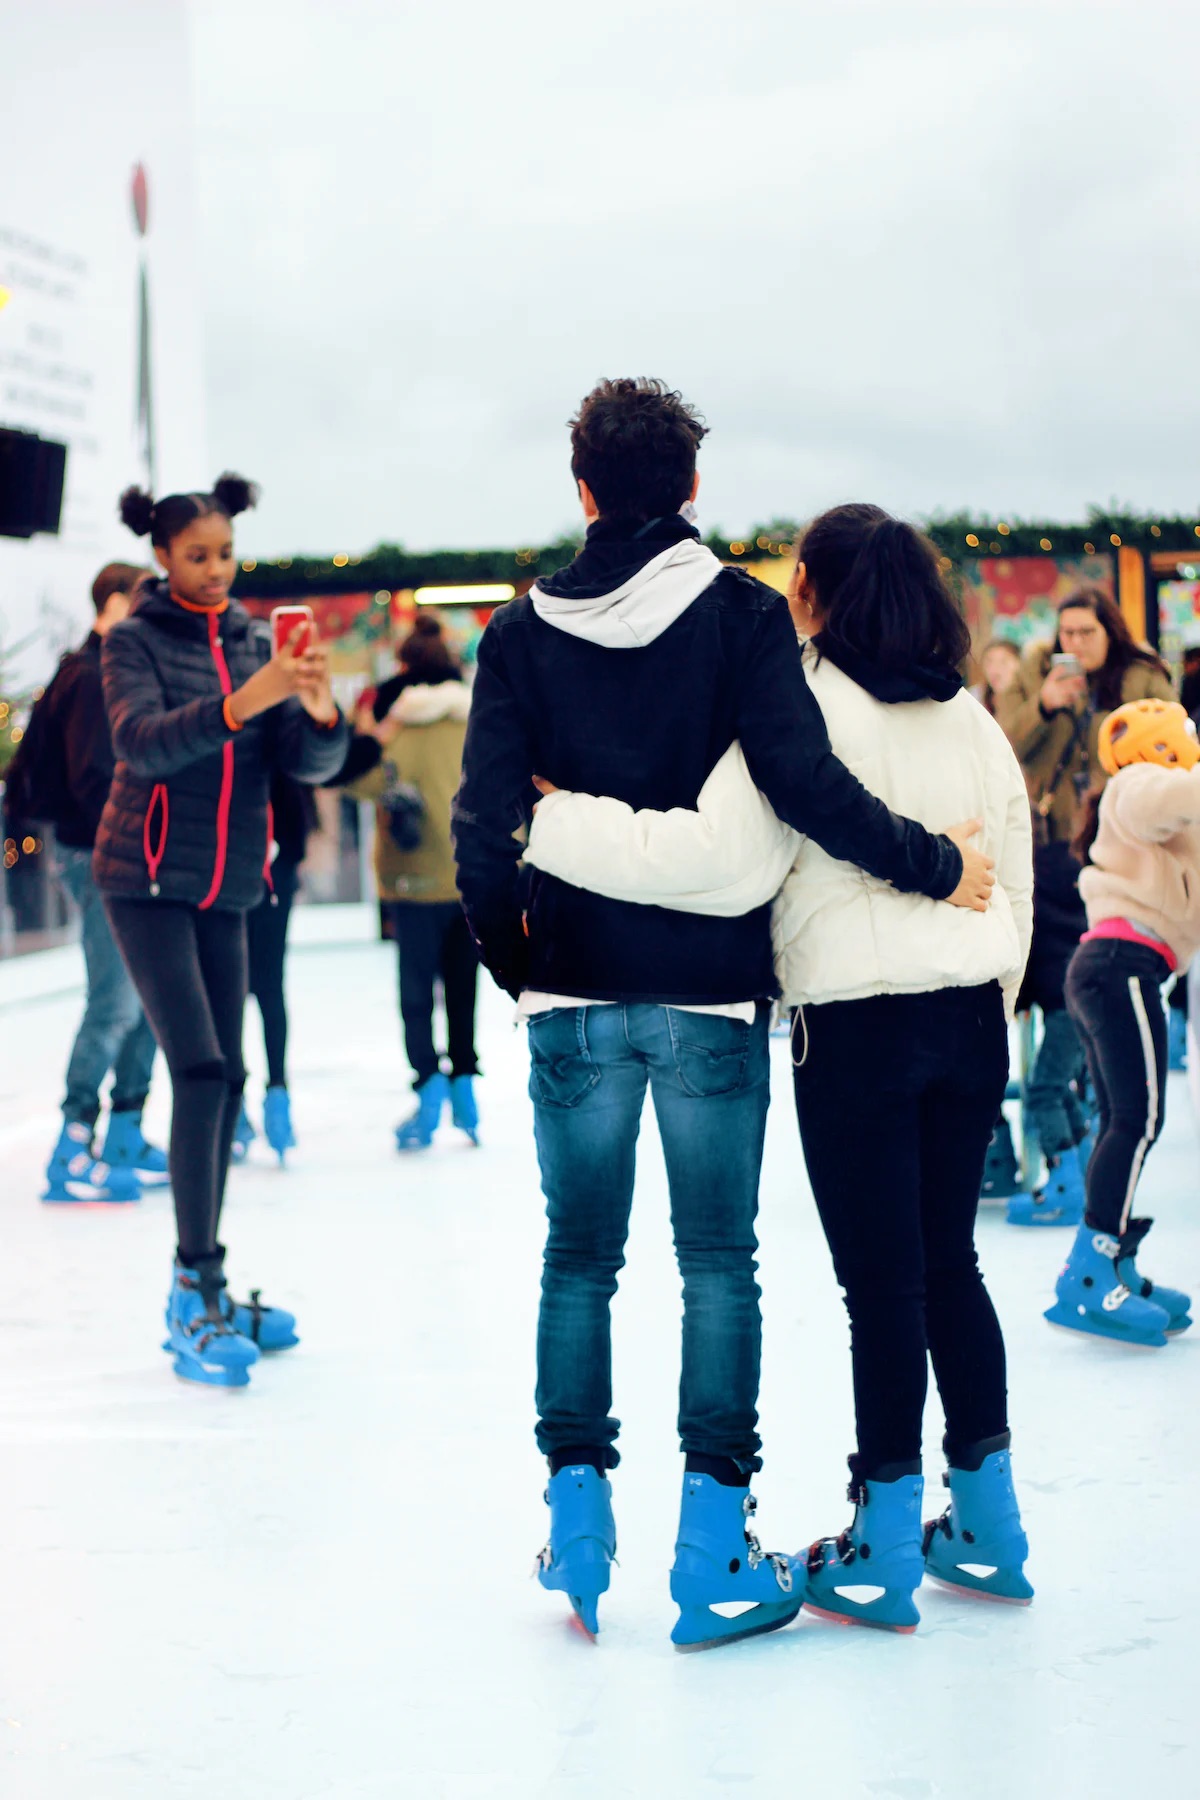 Ice skating returns to Santa Monica and DTLA, and from first-time skaters to experts, all are welcome.